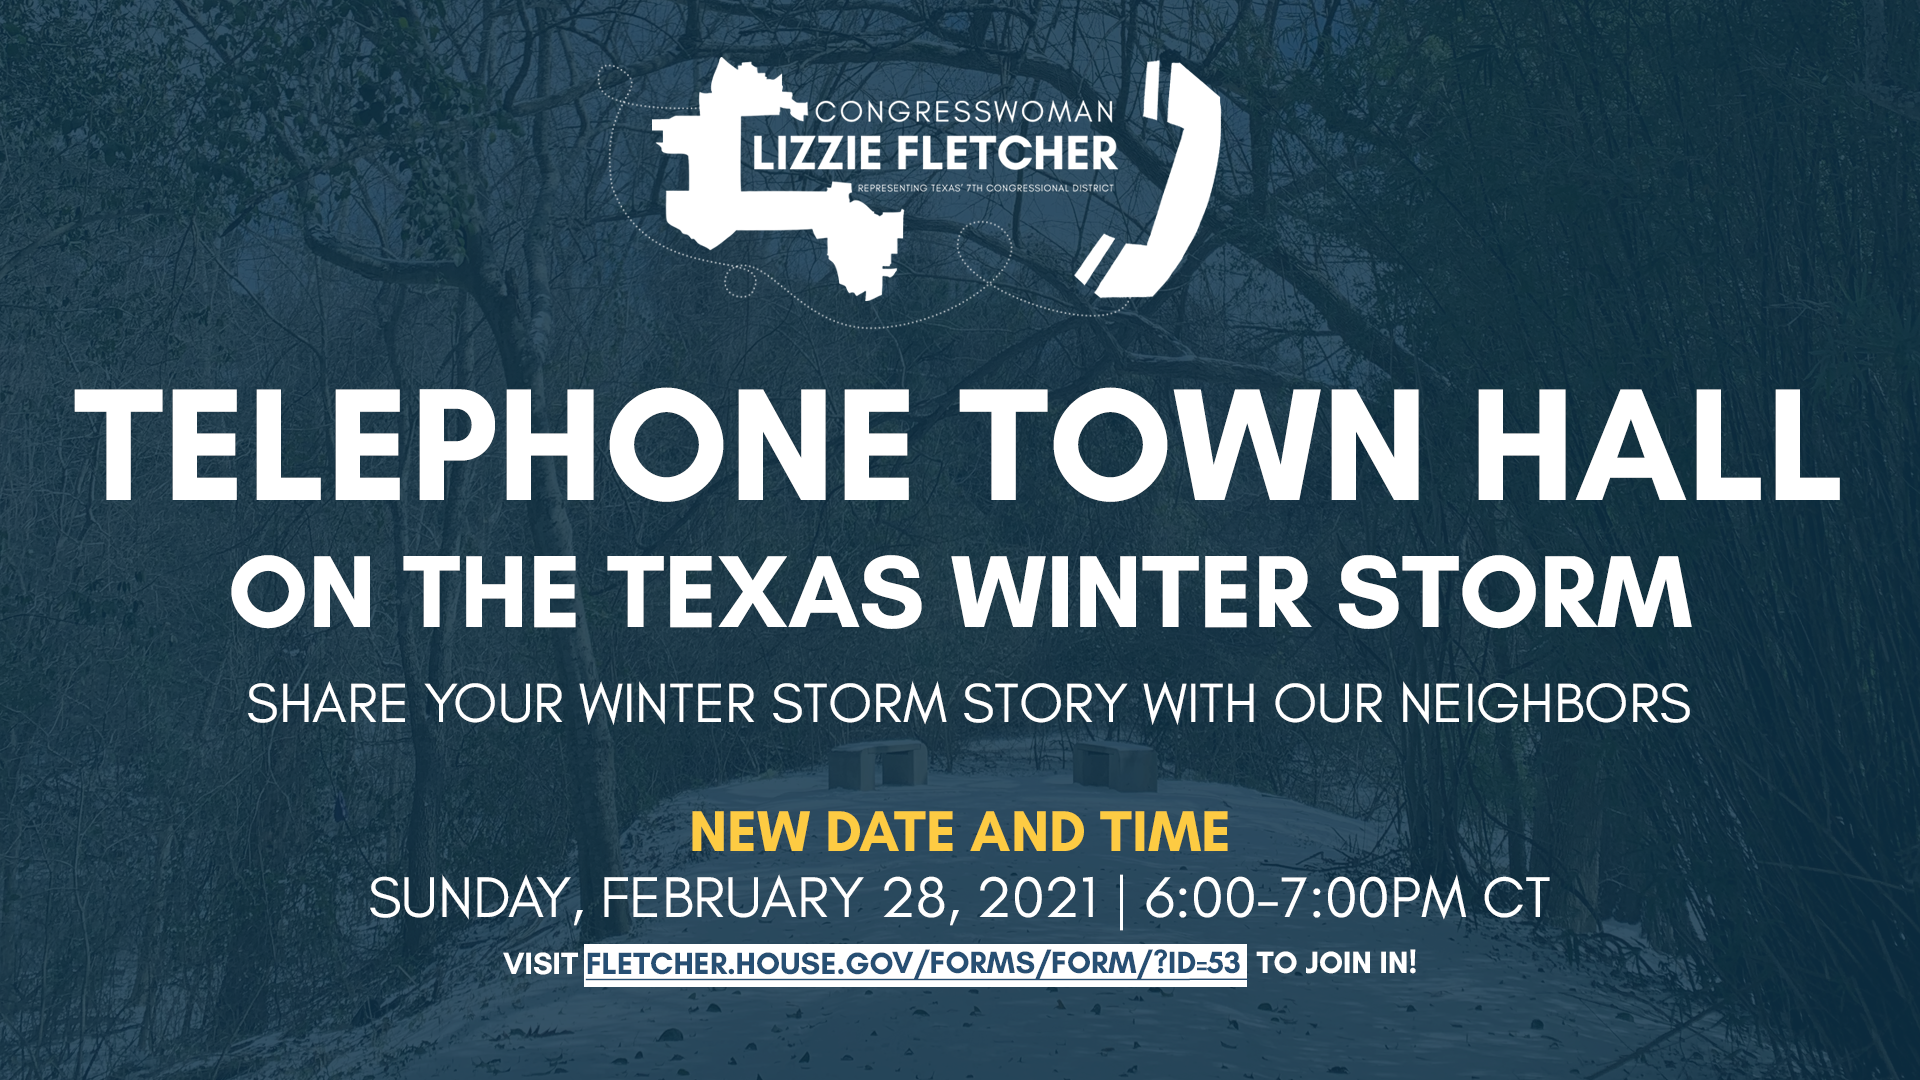 Click here to RSVP for my Winter Storm Telephone Town Hall on Sunday, February 28 at 6:00 PM